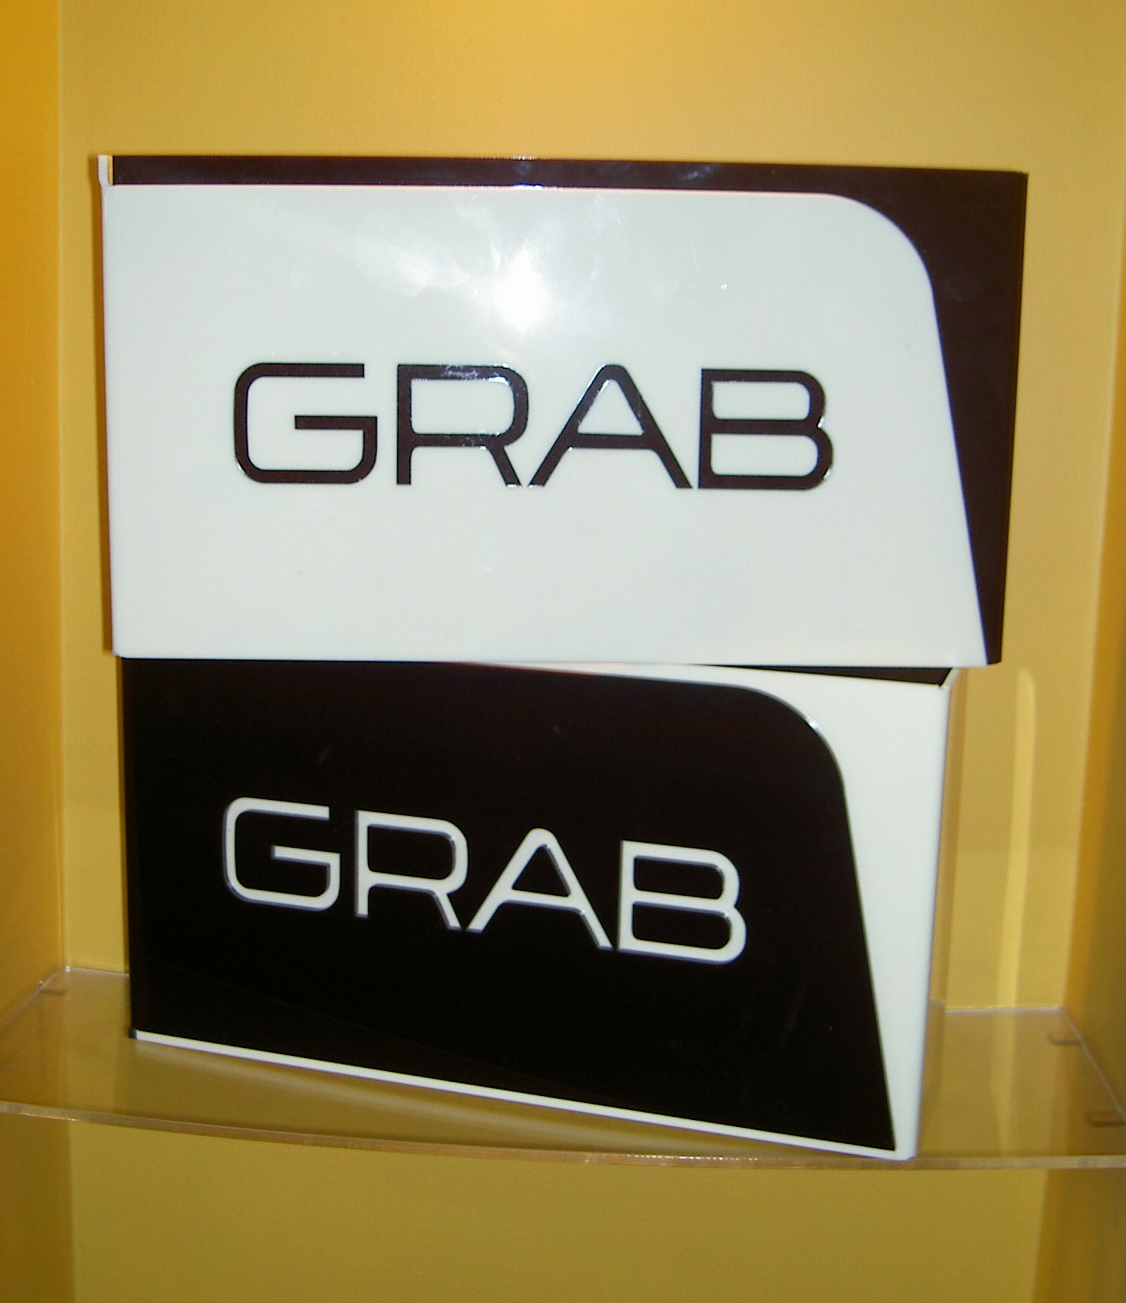  Grab clothing. Signage devices from black and cream acrylic 